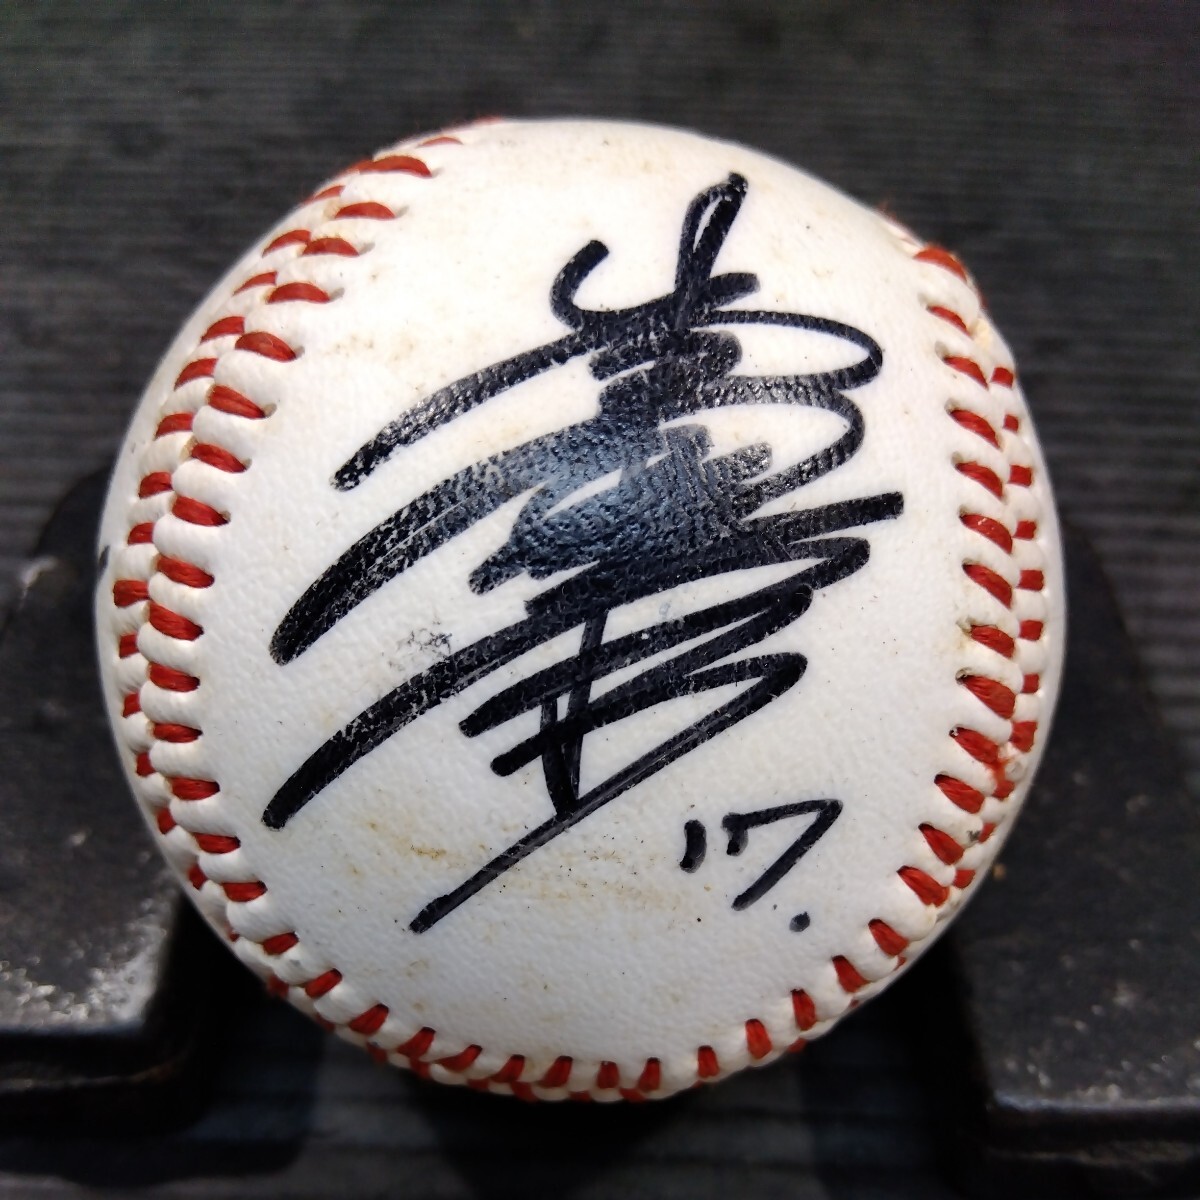 ⑯ Chunichi Dragons autograph autograph ball collection of autographs wistaria ... Komatsu . male ... one mountain inside one . cow island peace . not for sale Professional Baseball player Showa era active service that time thing 